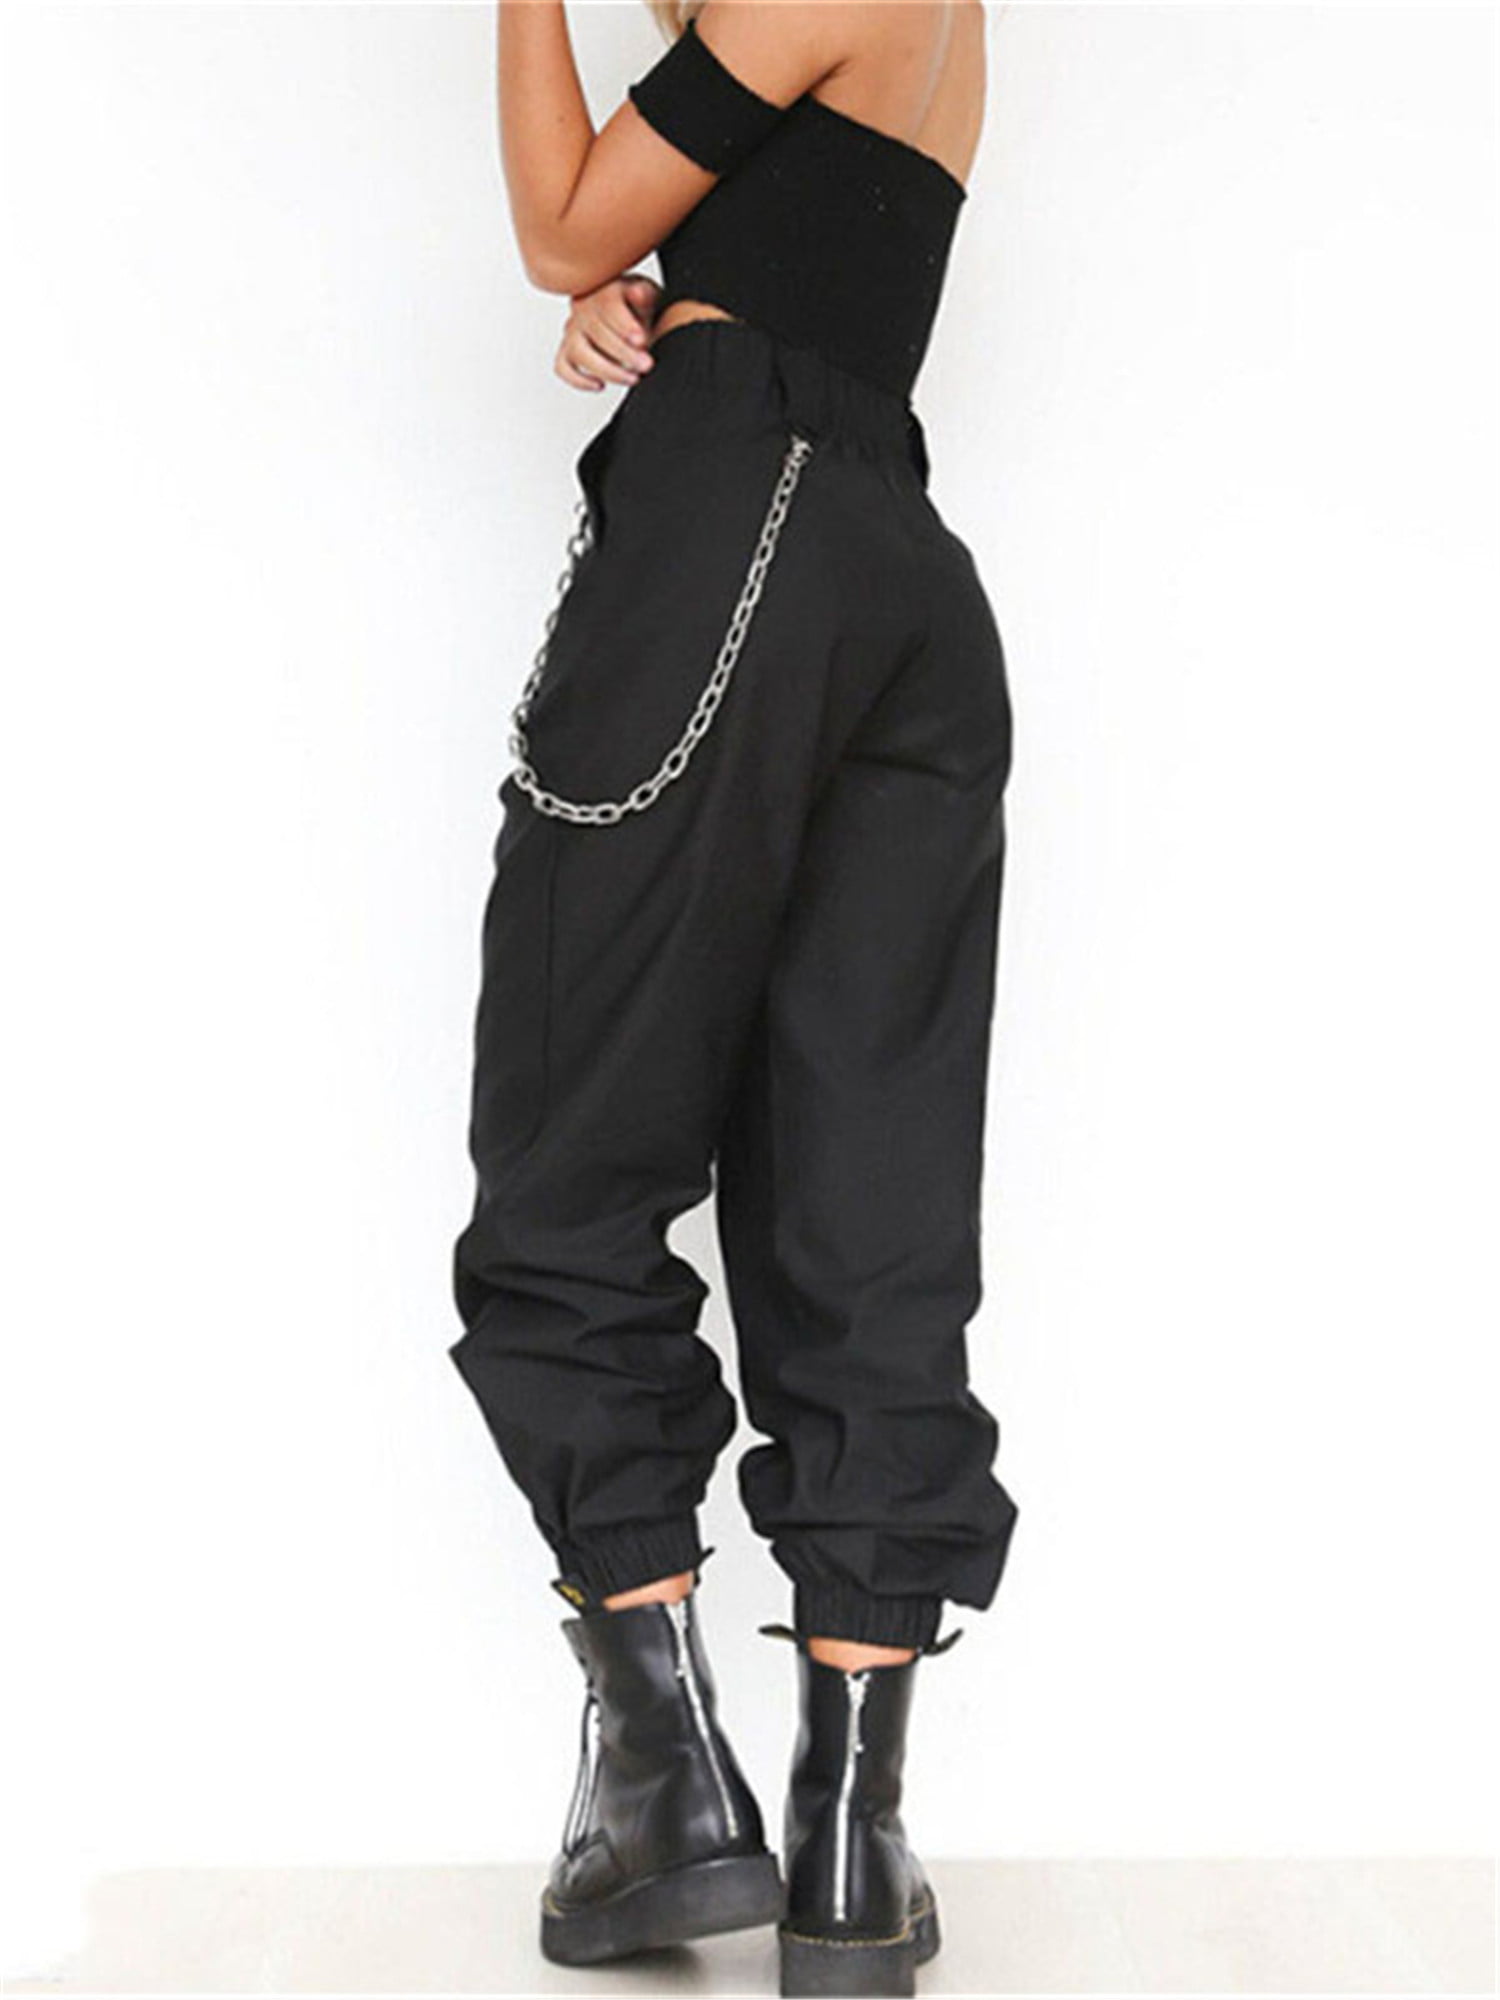 Mens Gothic Chain Cargo Trousers Bottoms Rock Chain Bondage Casual Pants  Streets | eBay